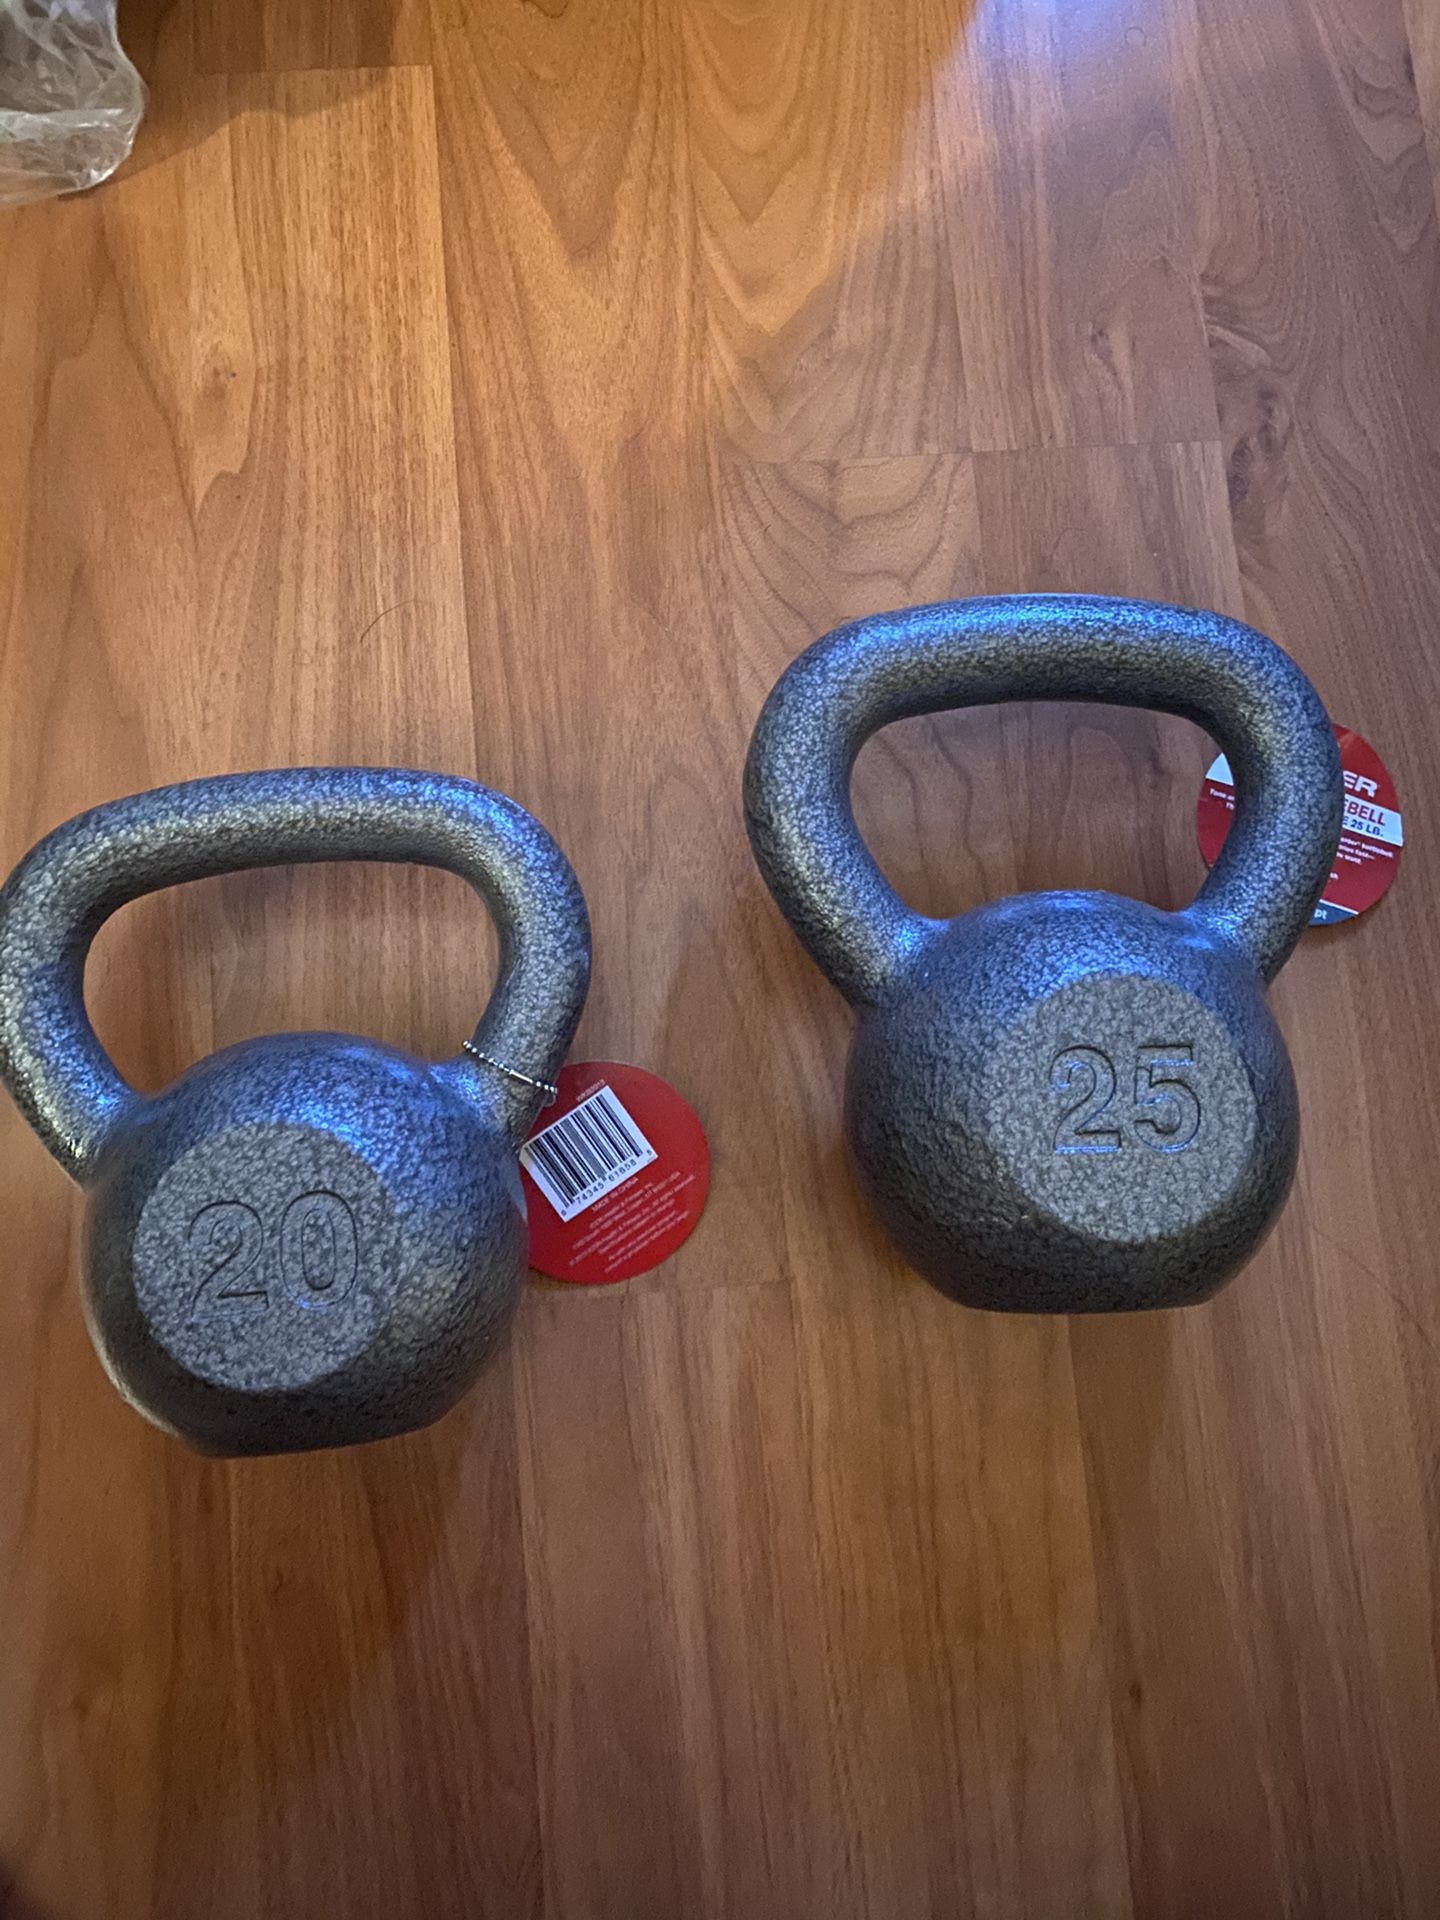 Kettlebells- iron cast 20 pounds and 25 pounds